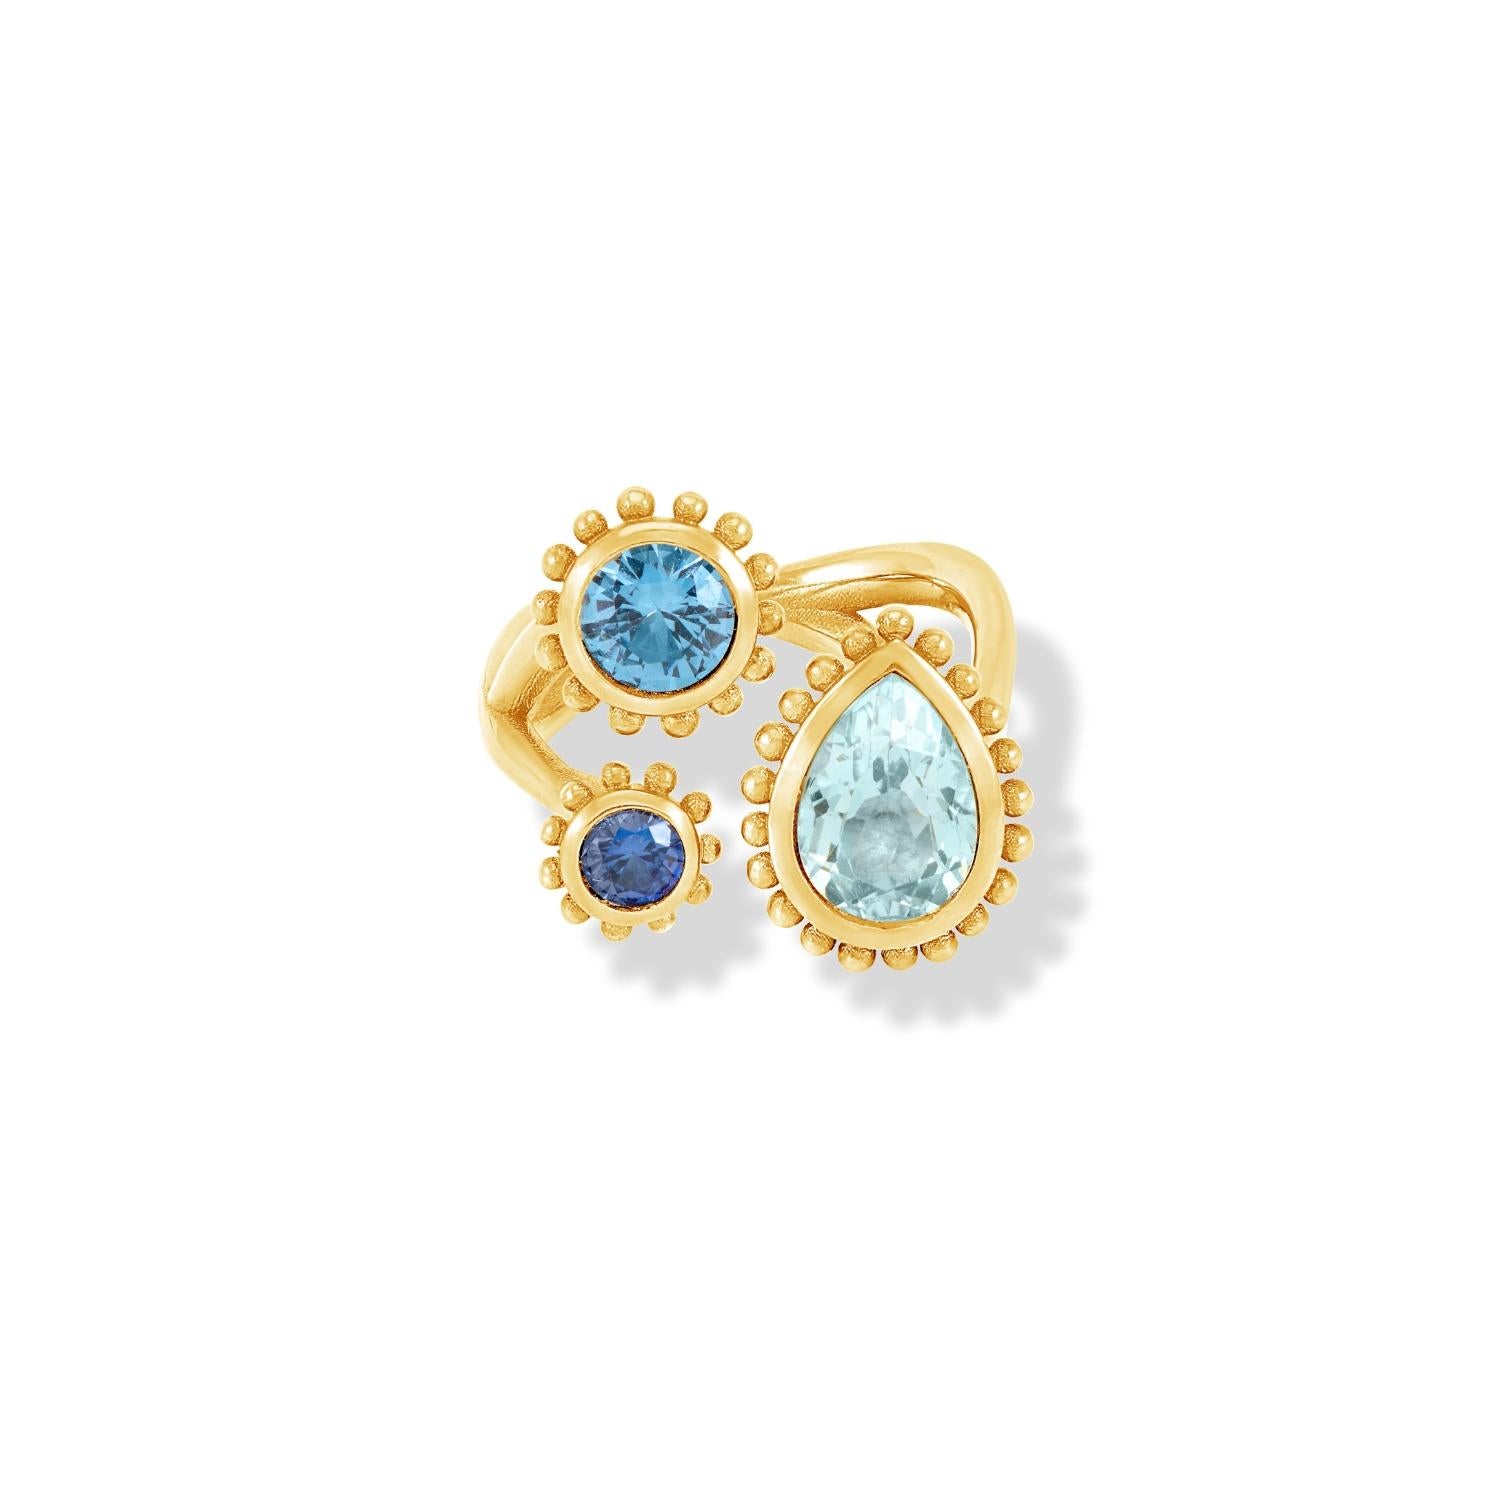 This dramatic and directional ring is set with three stones in 14k yellow gold featuring granulated balls around the outside of the rub-over settings. Inspired by creatures of the coral reef, this colourful Anemone collection is fascinating in its